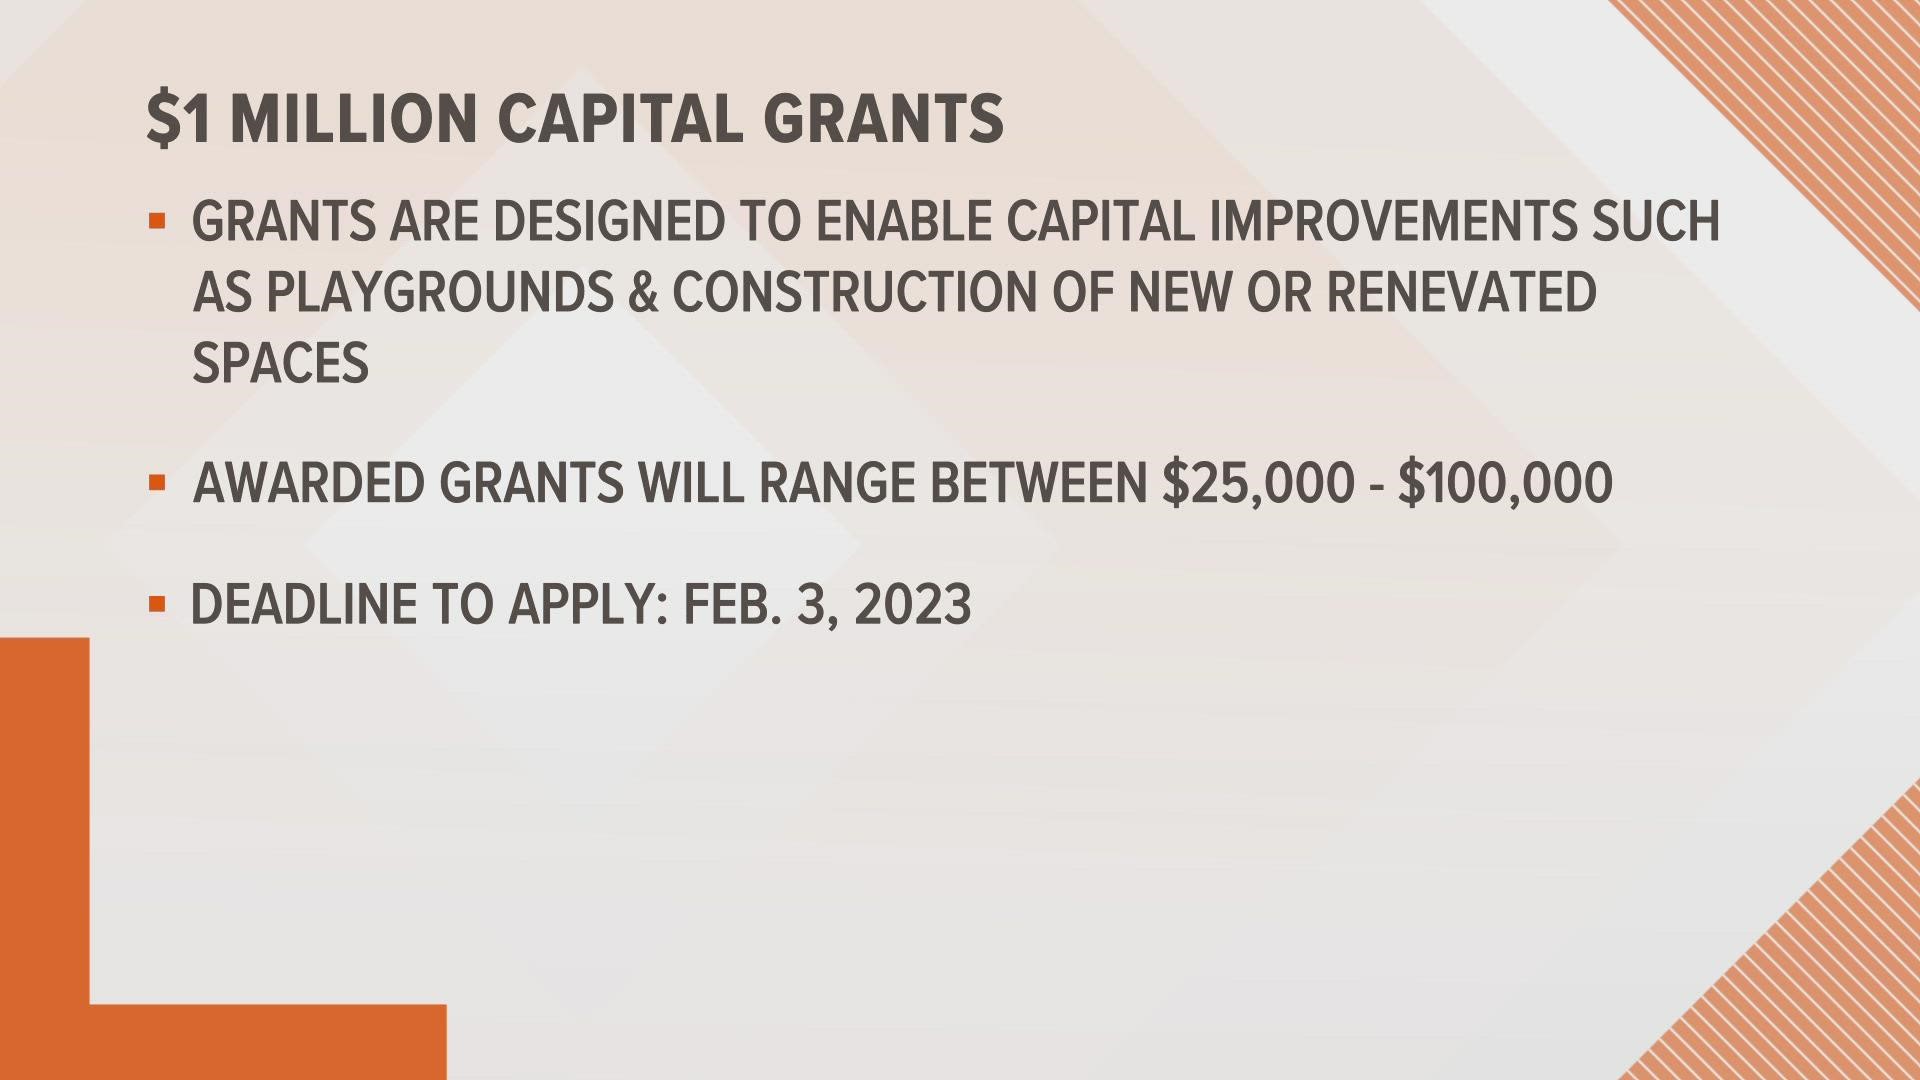 The grants will fund capital projects that will improve the infrastructure of surrounding cities.